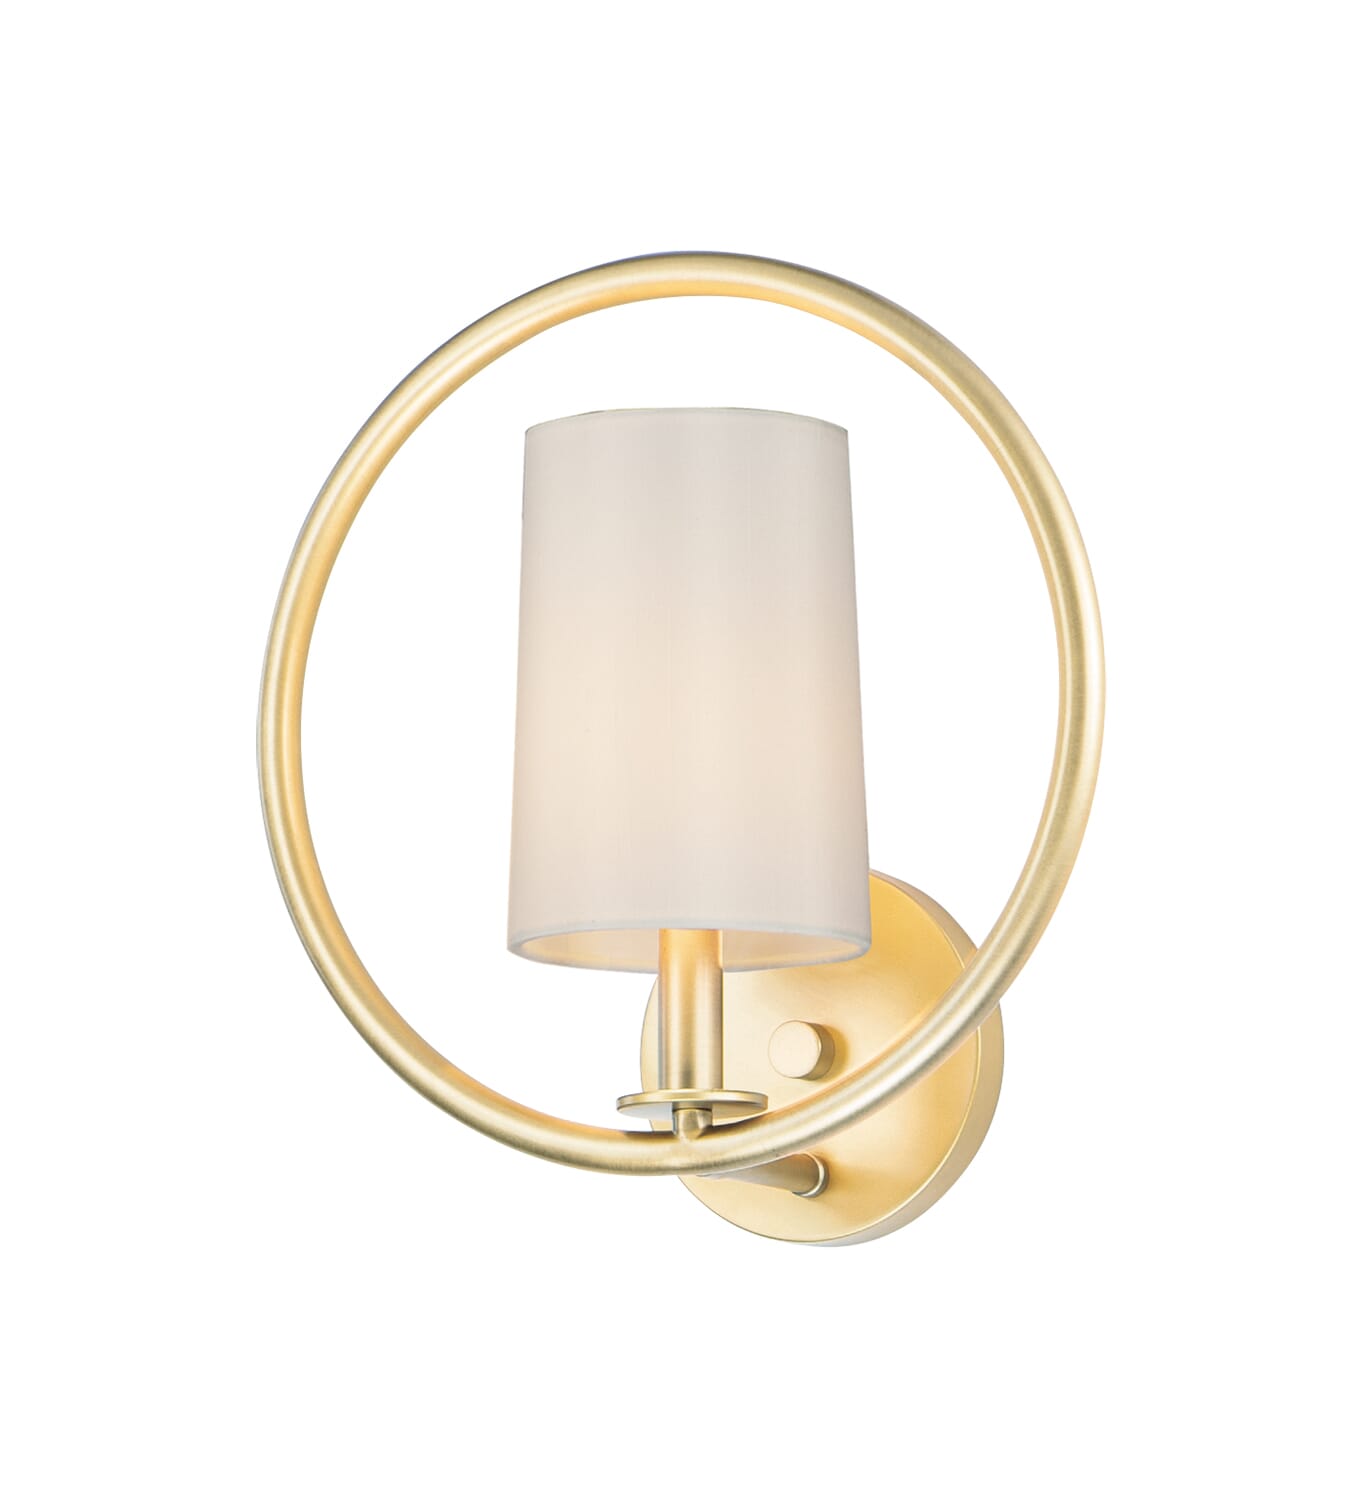 Maxim Meridian Ceiling Light in Natural Aged Brass - 25291OFNAB